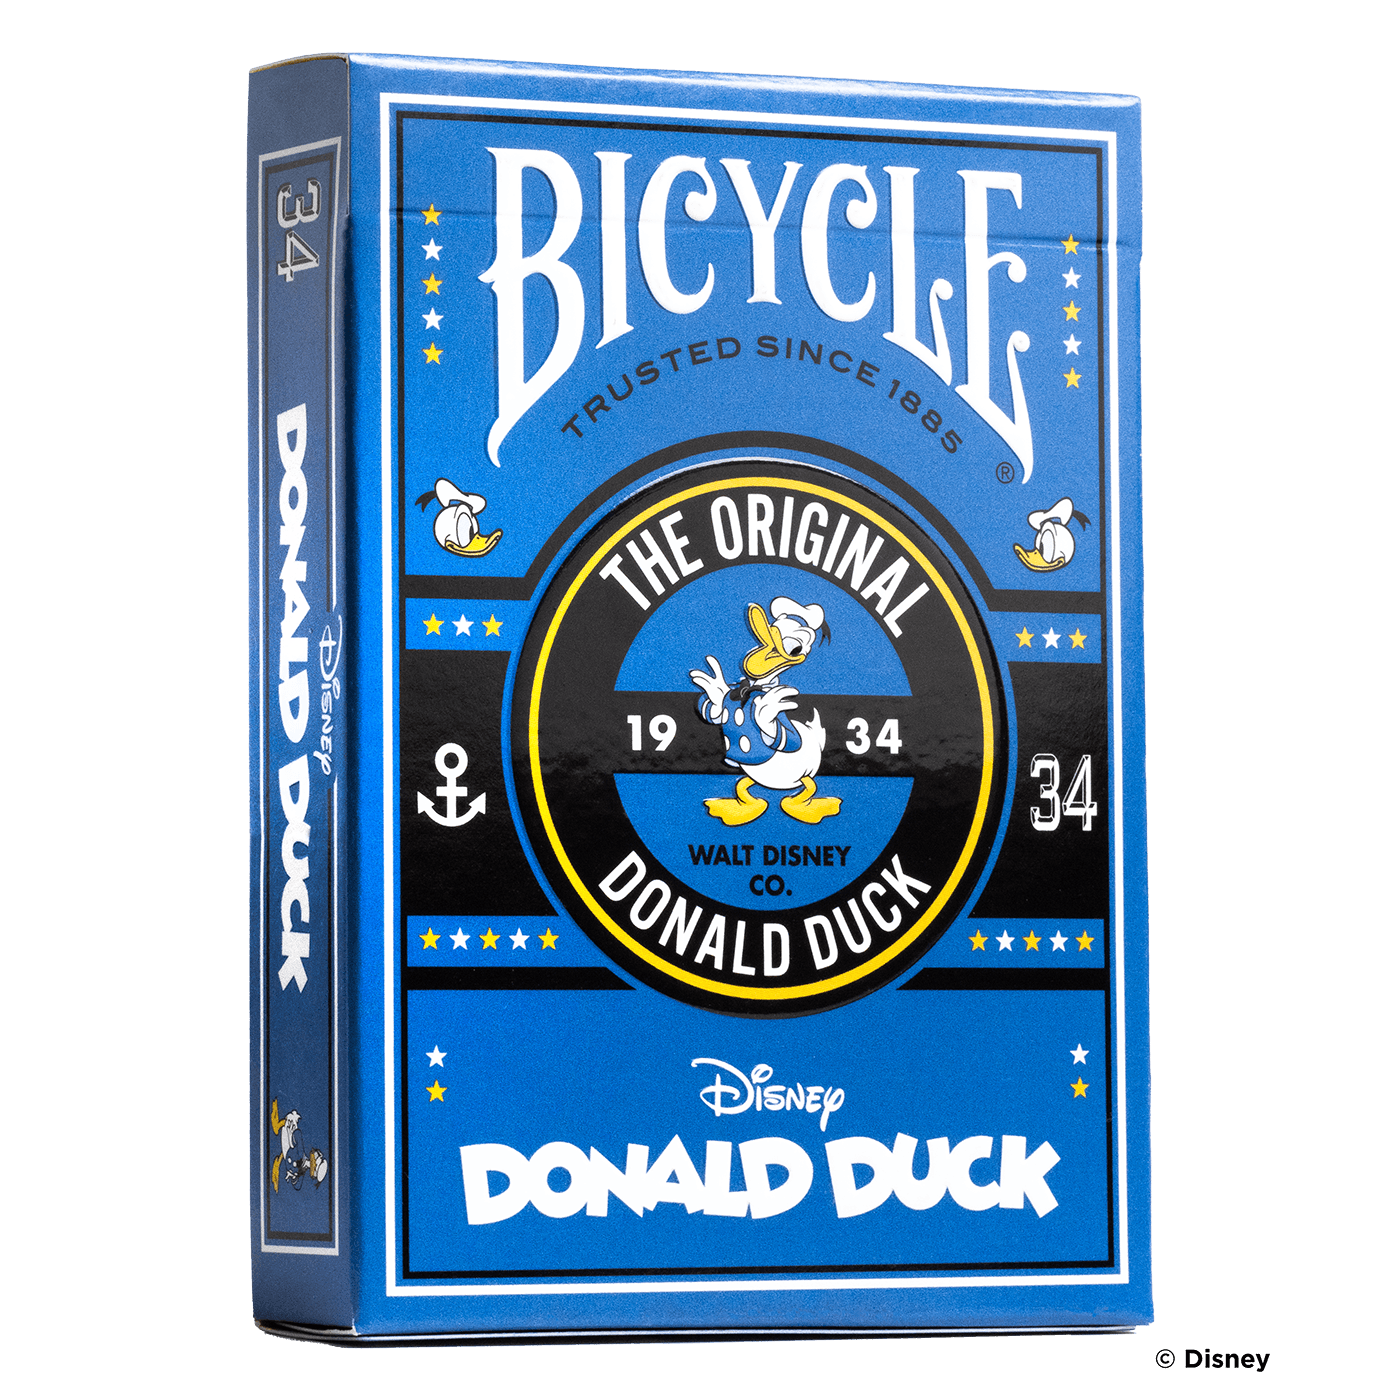 Disney Classic Donald Duck Inspired Playing Cards by Bicycle